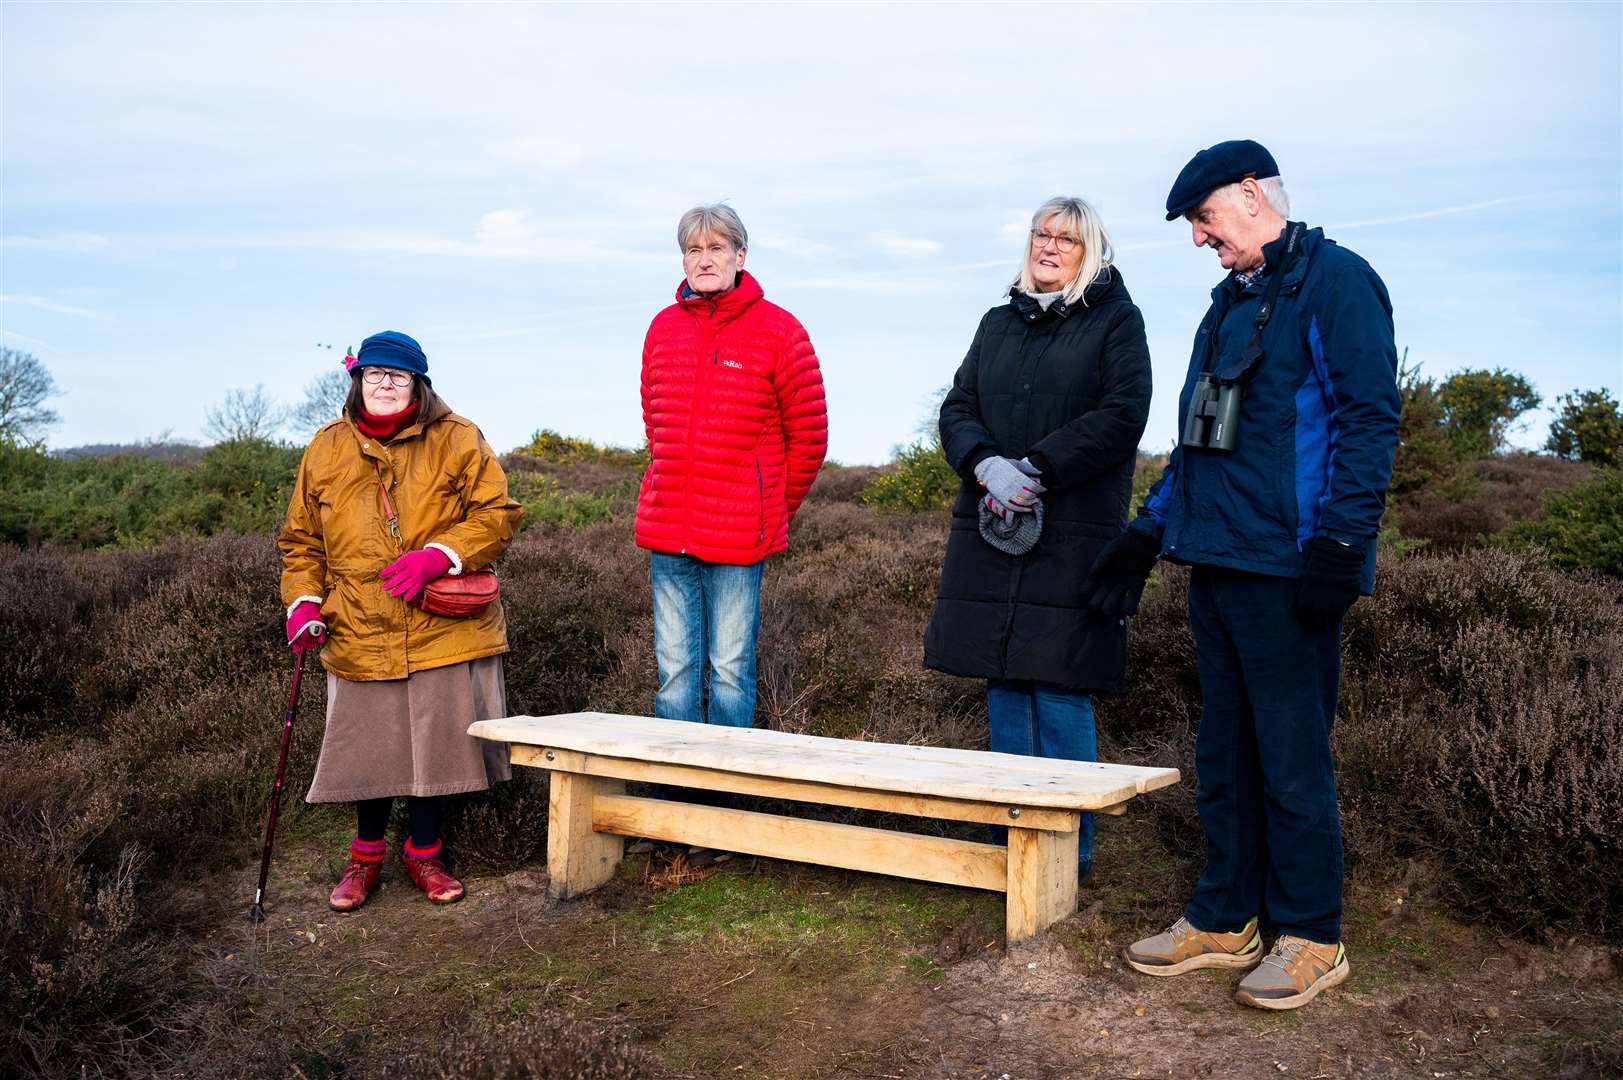 The unveiling of the bench